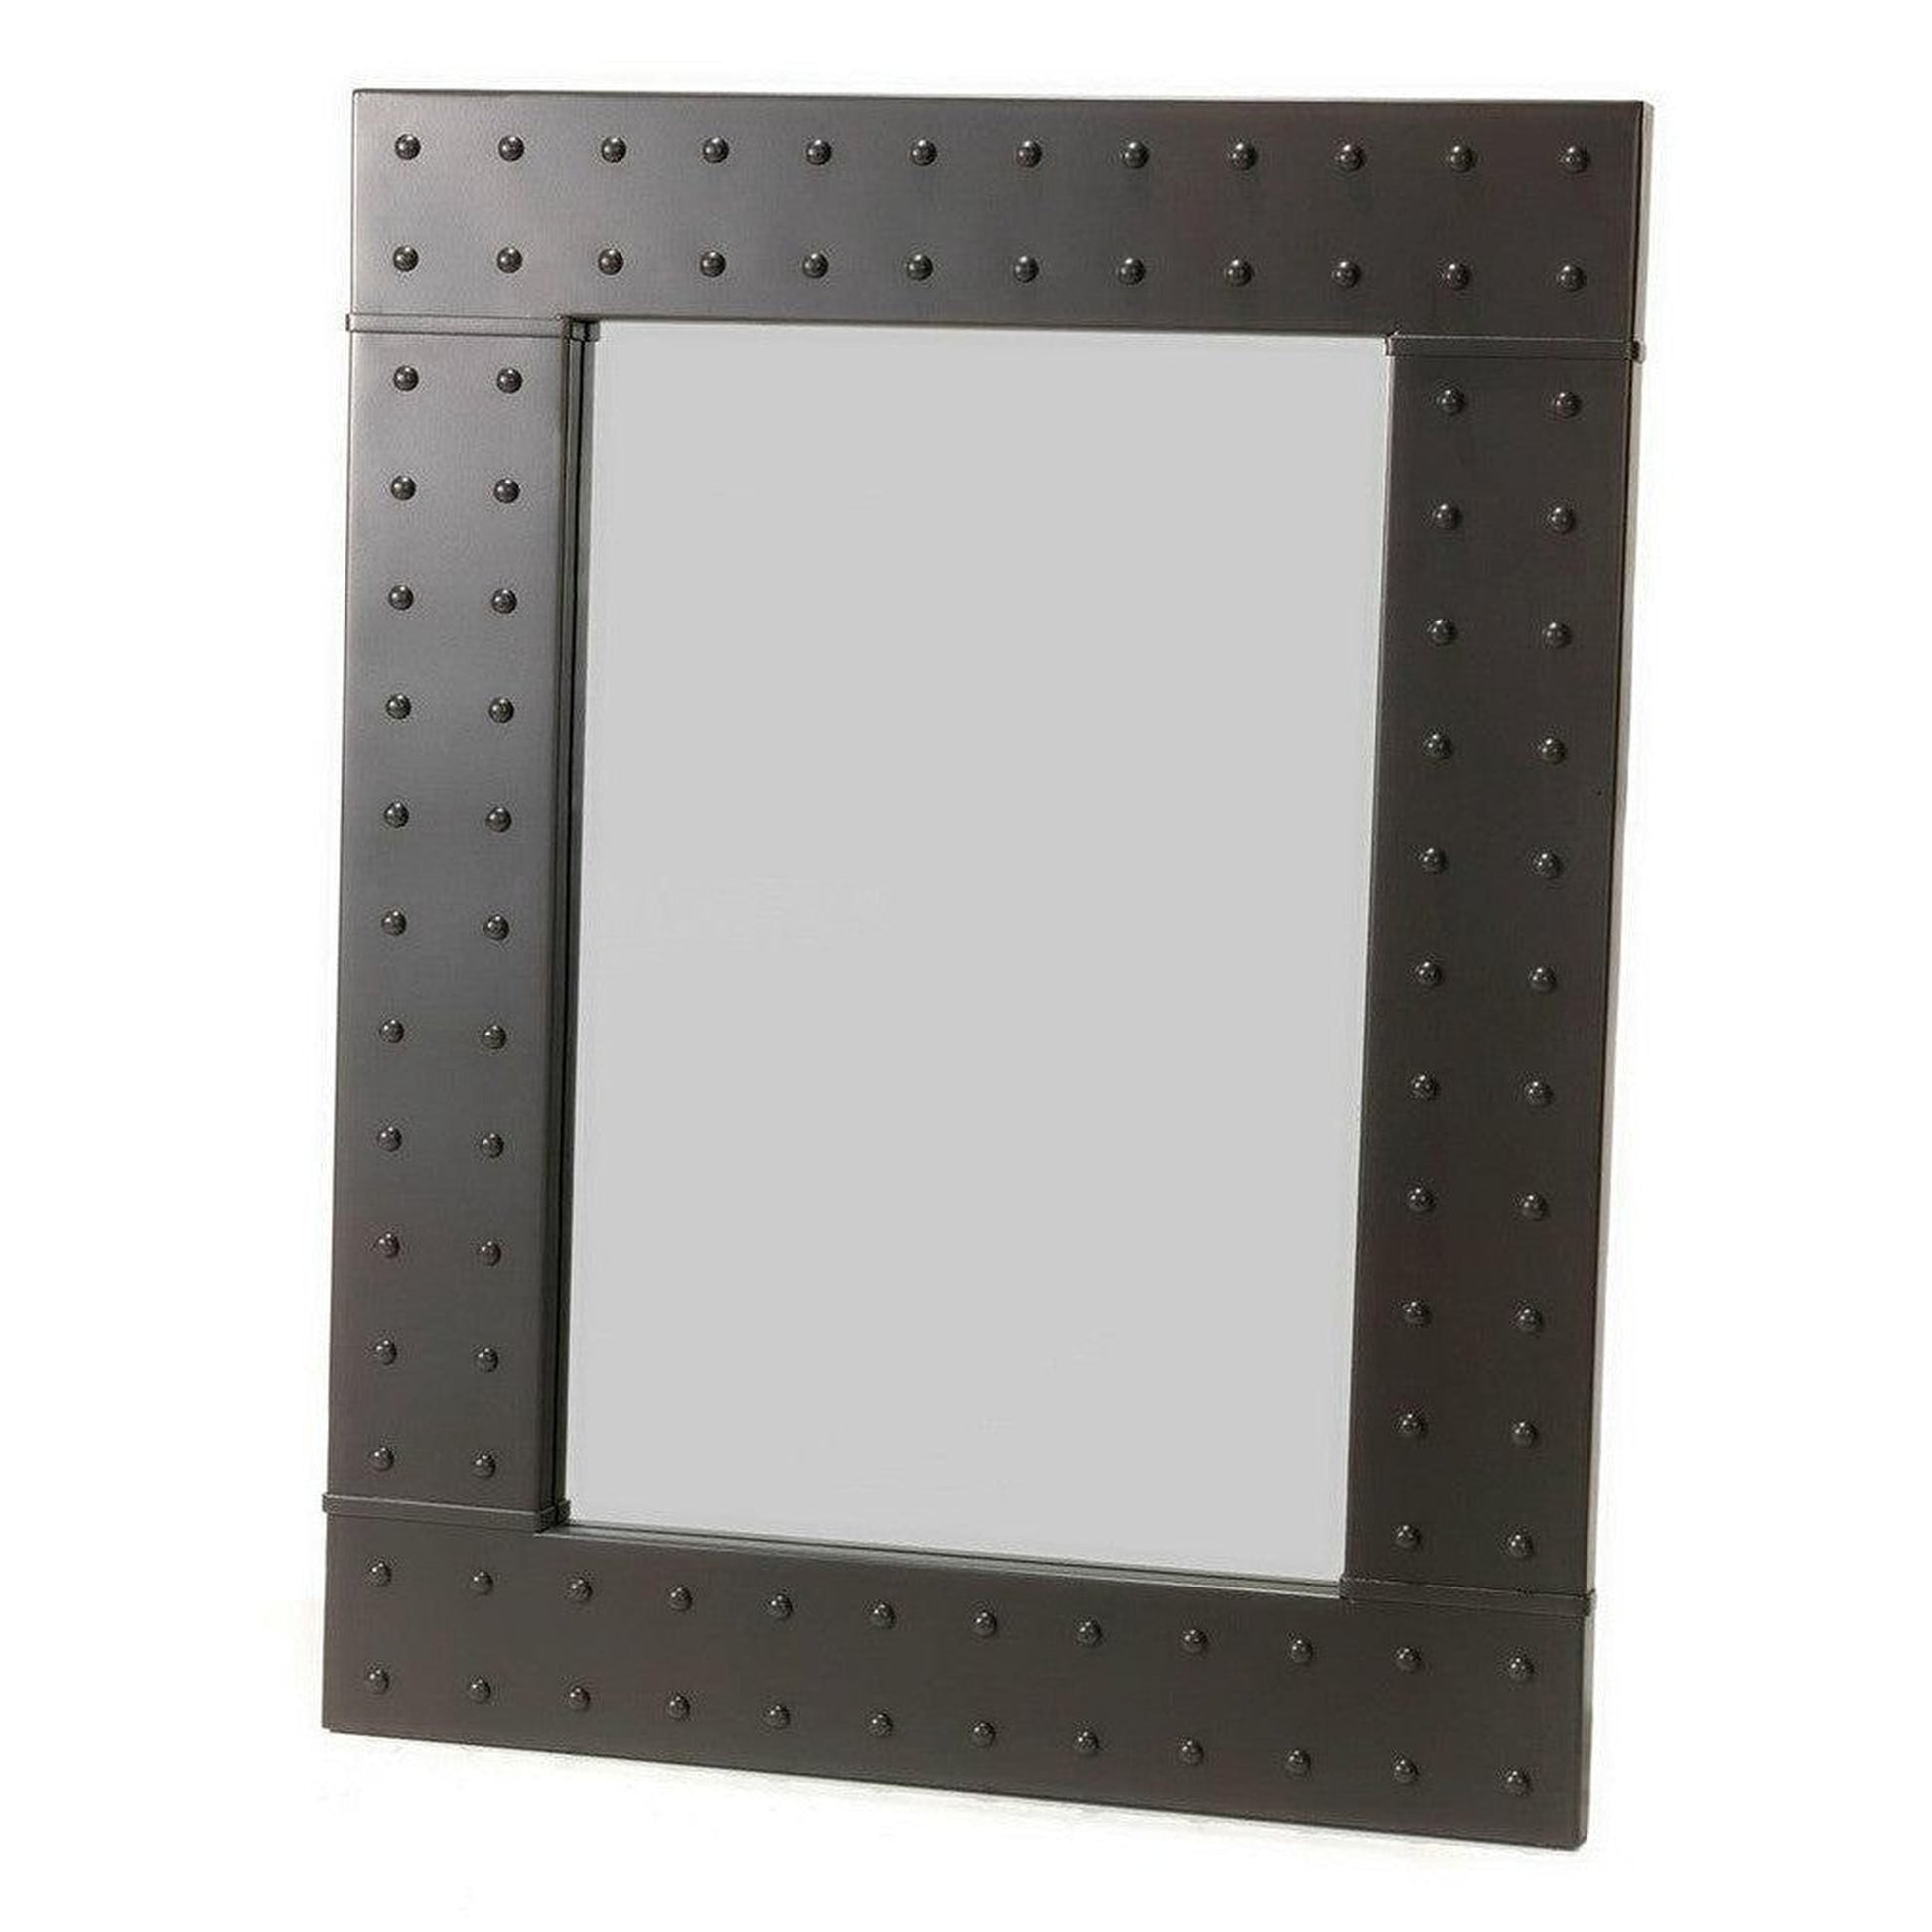 Stone County Ironworks Merrimack Rivet 31" x 35" Small Natural Black Iron Wall Mirror With Pewter Iron Accent